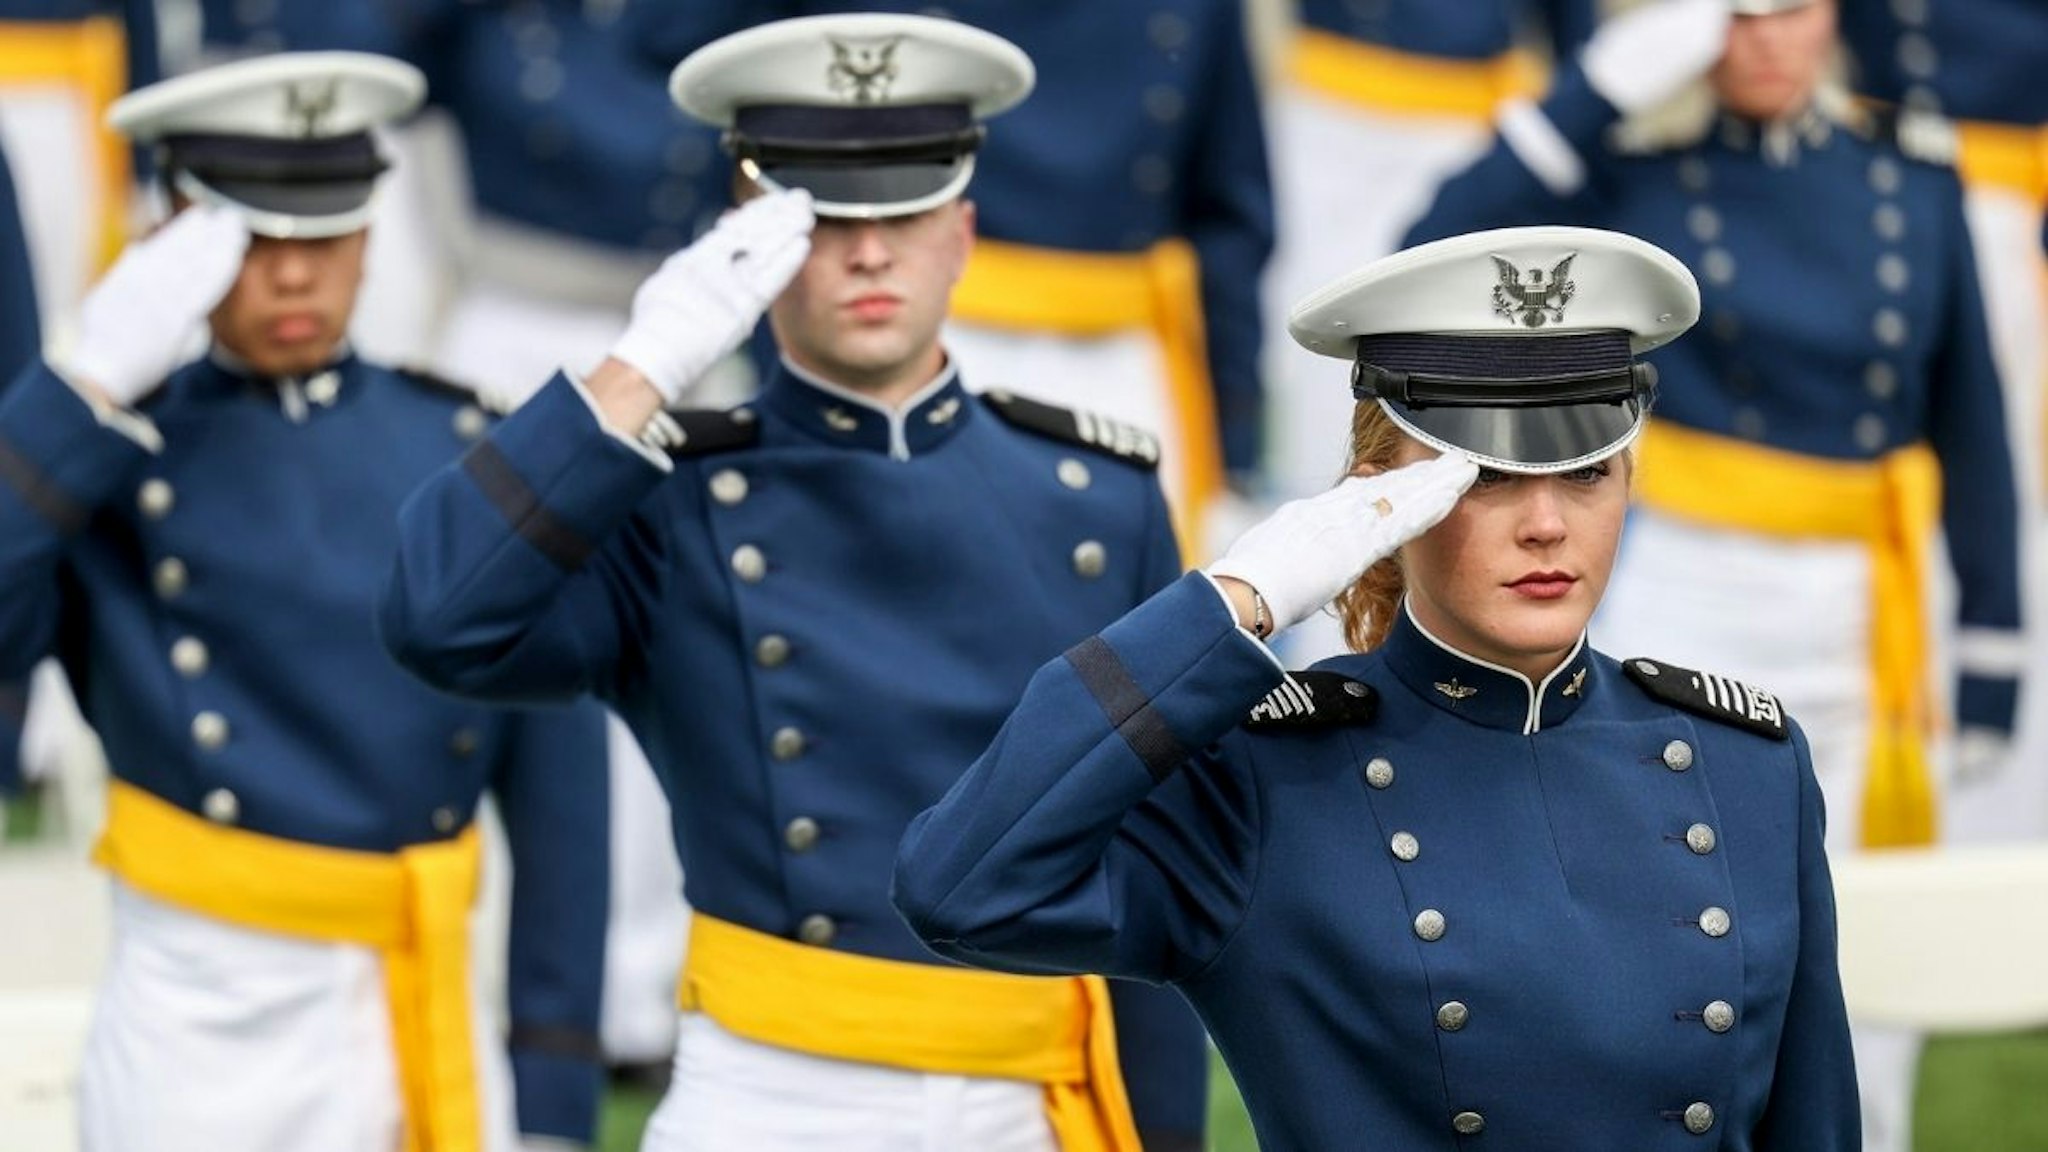 Members of the United States Air Force Academy Class of 2021 salute during their graduation ceremony at Falcon Stadium on May 26, 2021 in Colorado Springs, Colorado.